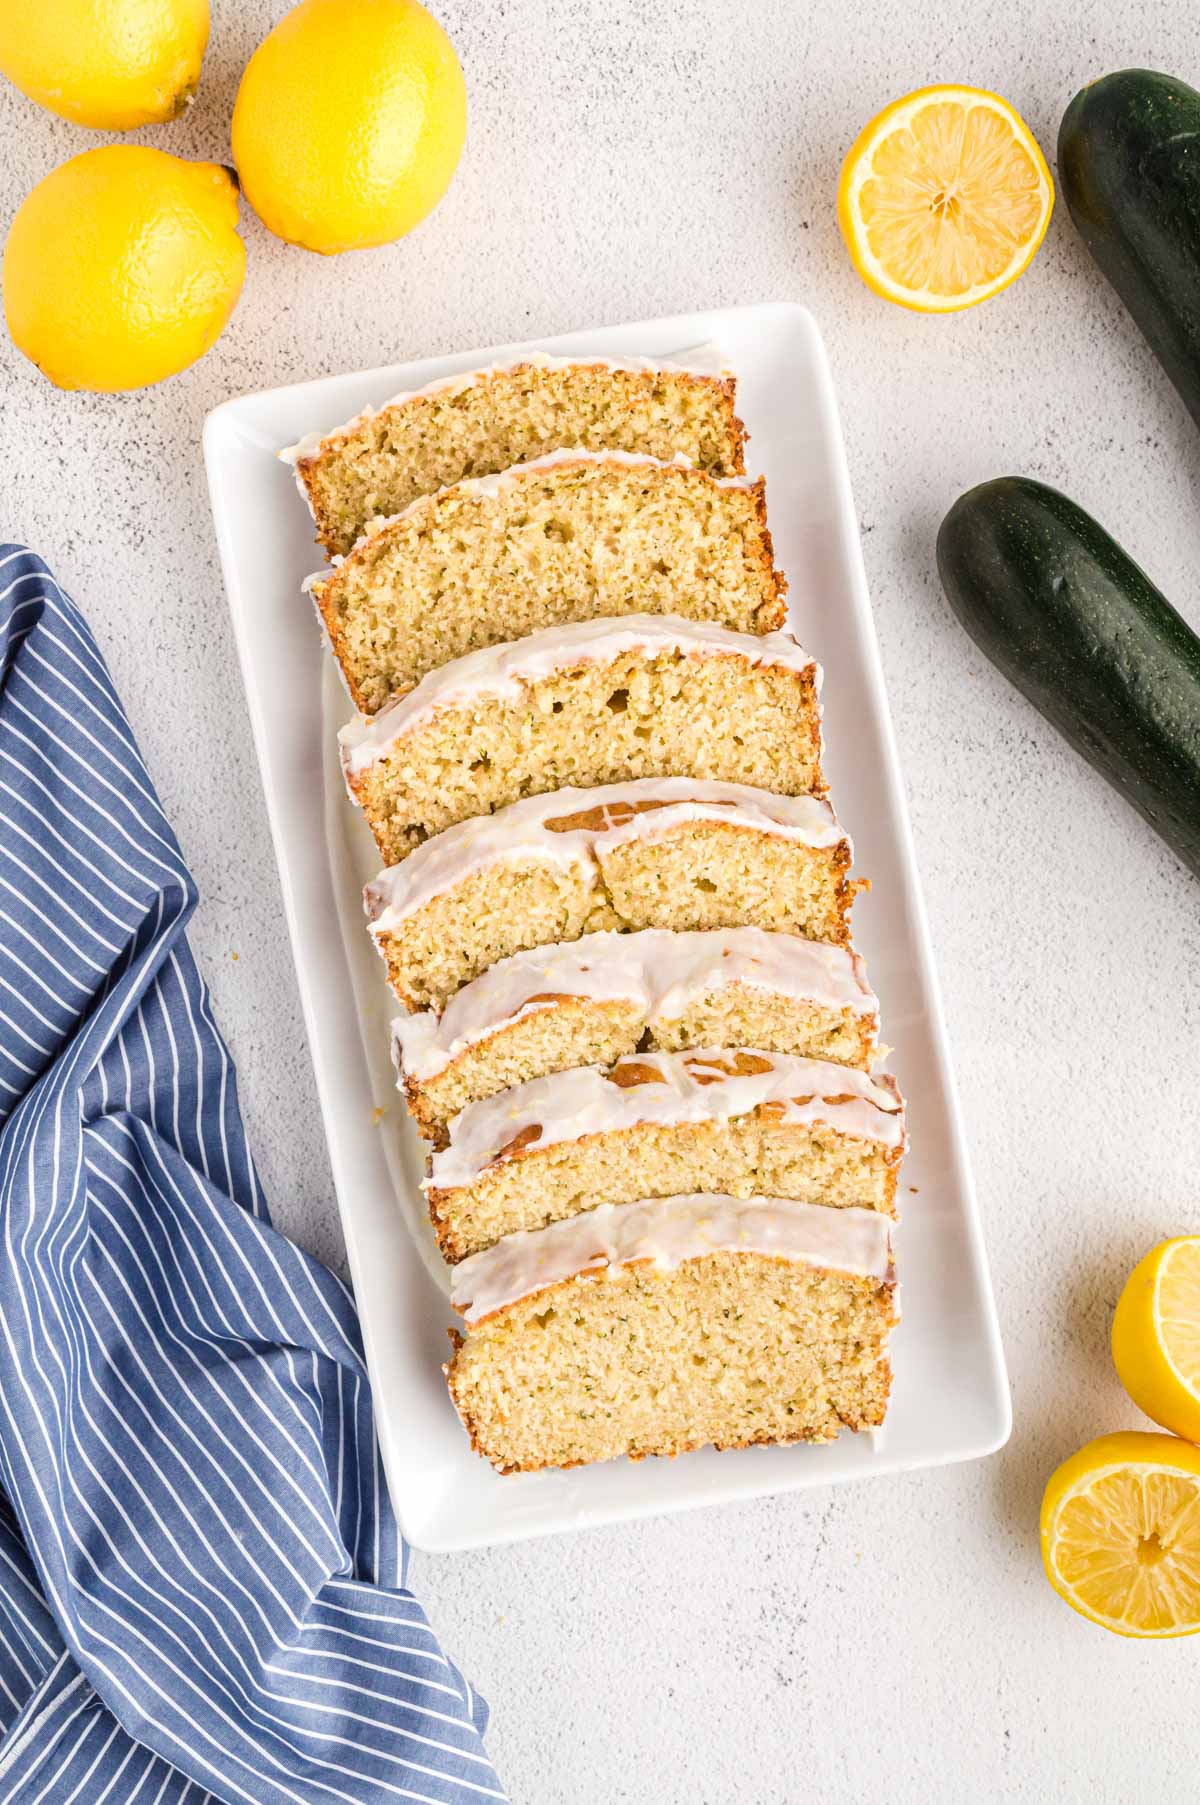 Overhead view of a sliced loaf of zucchini lemon bread on a white platter.